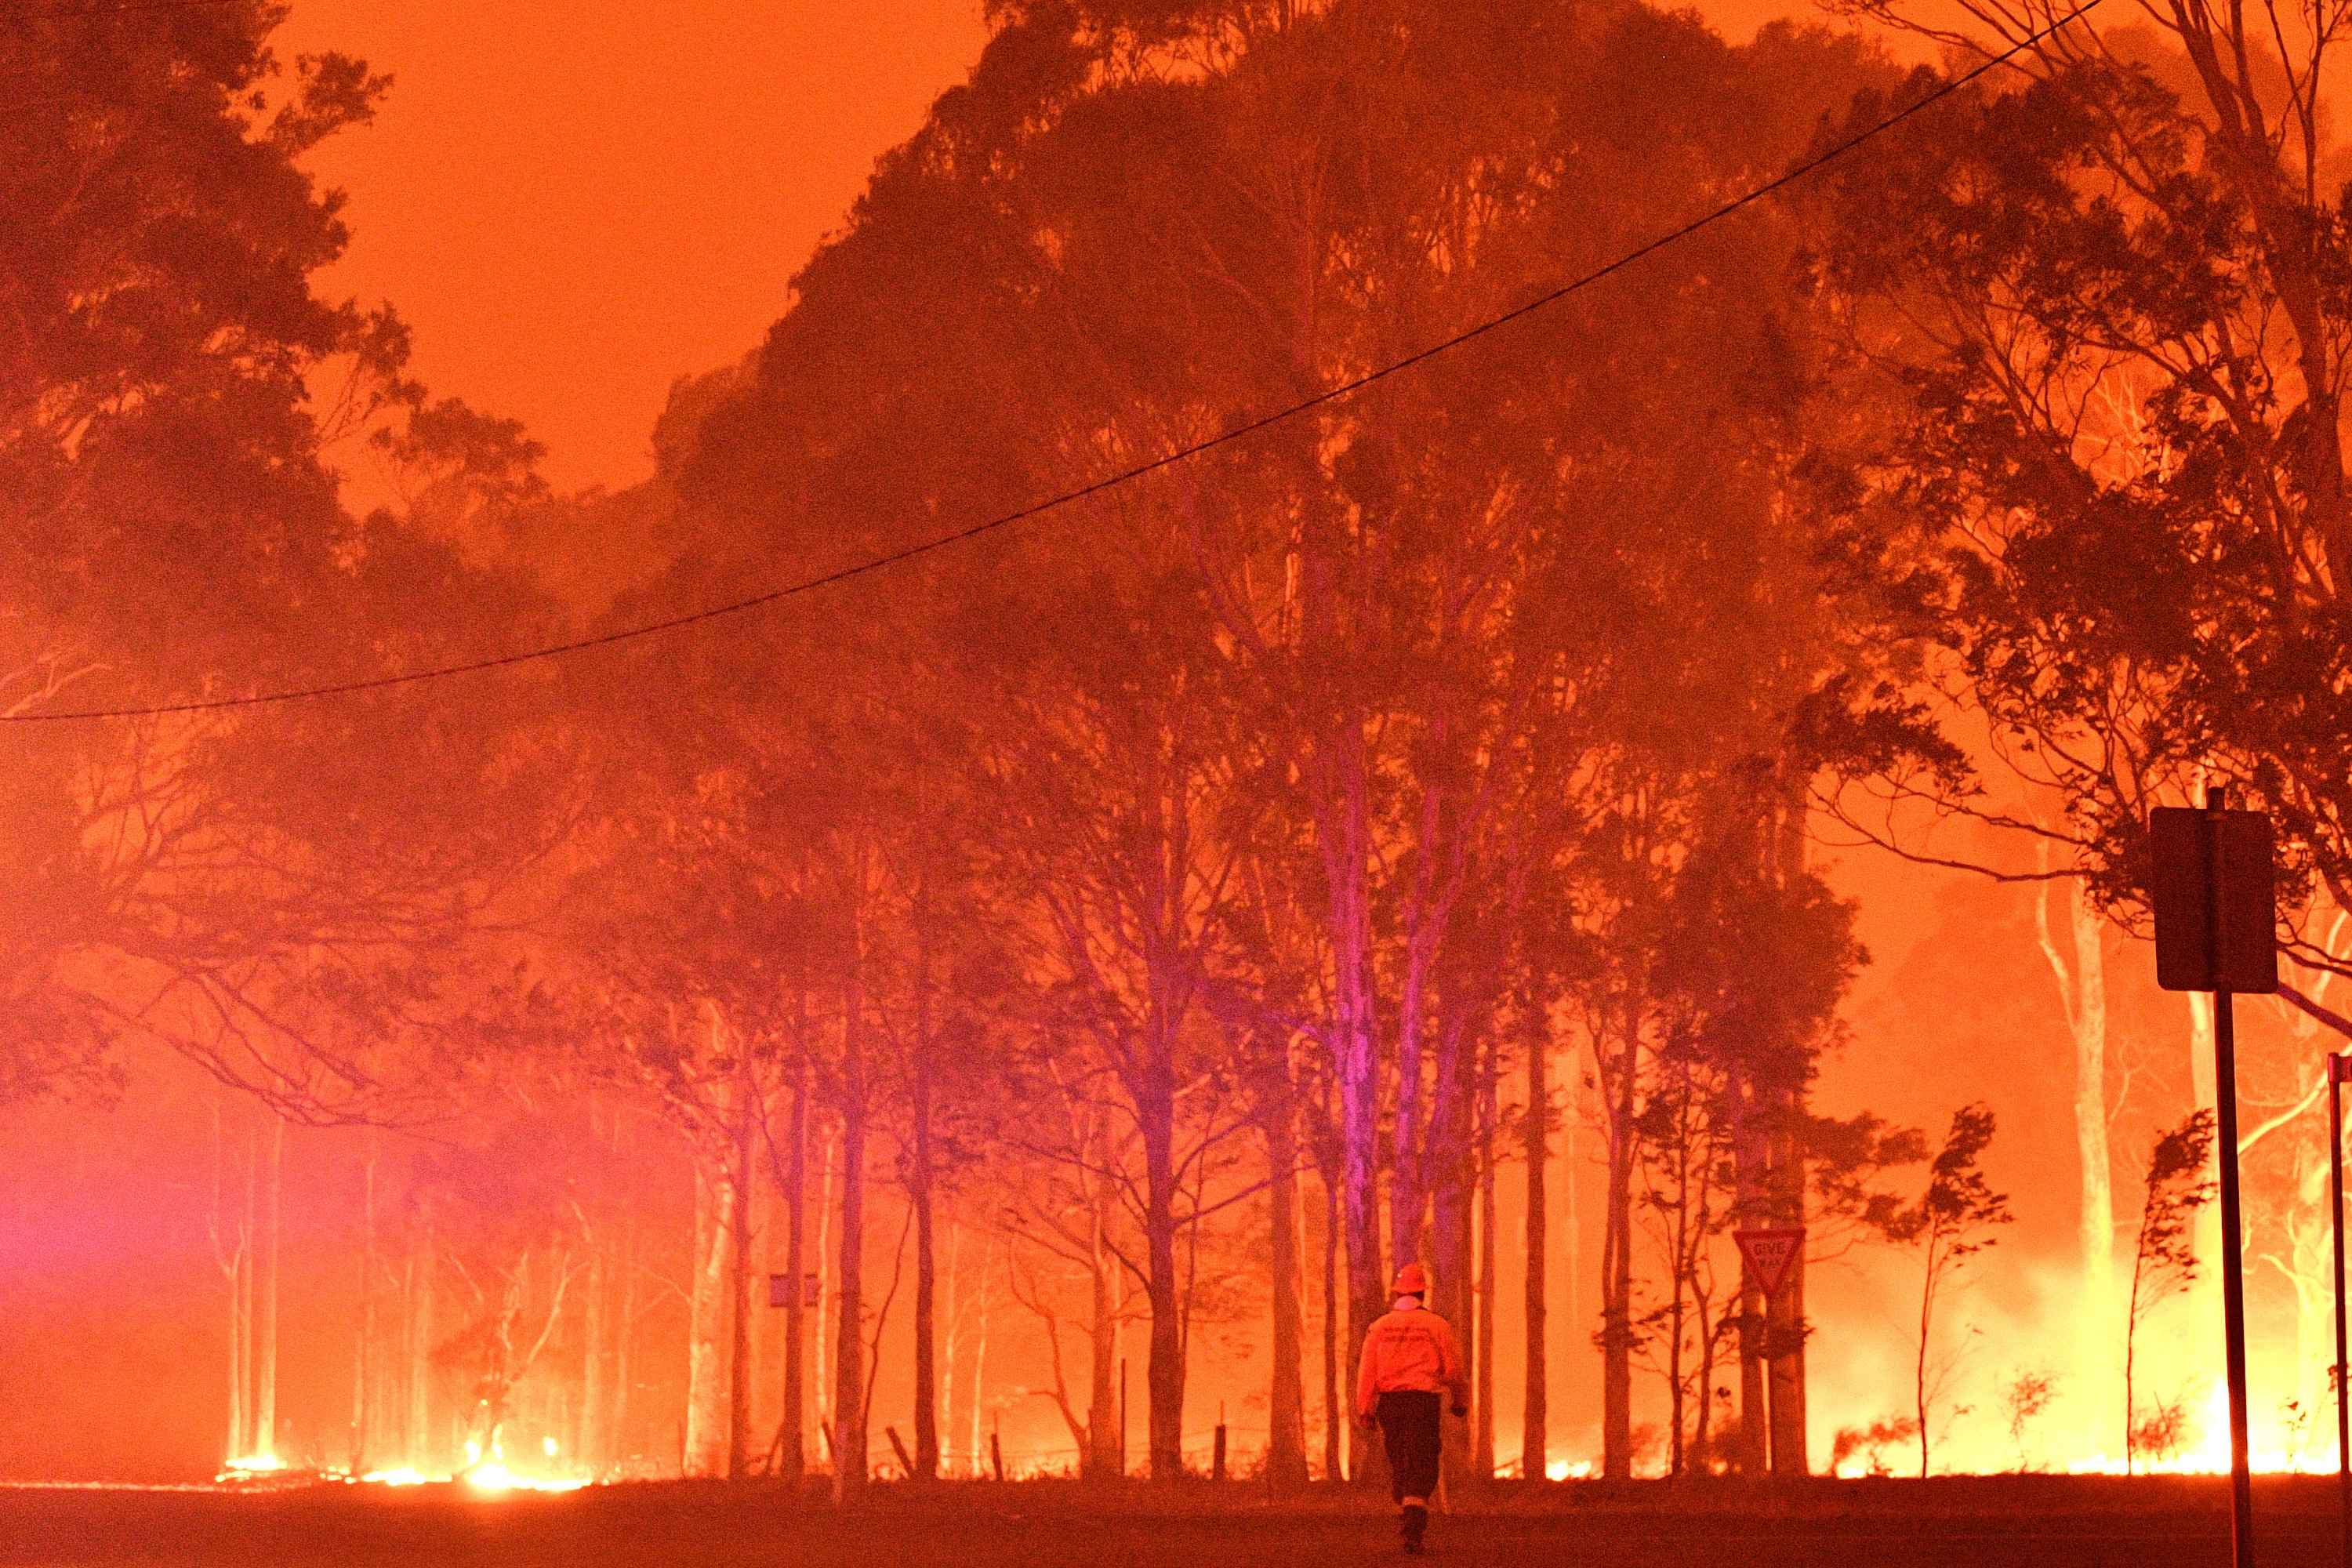 A firefighter during a battle against bushfires in Australia. Photo: AFP